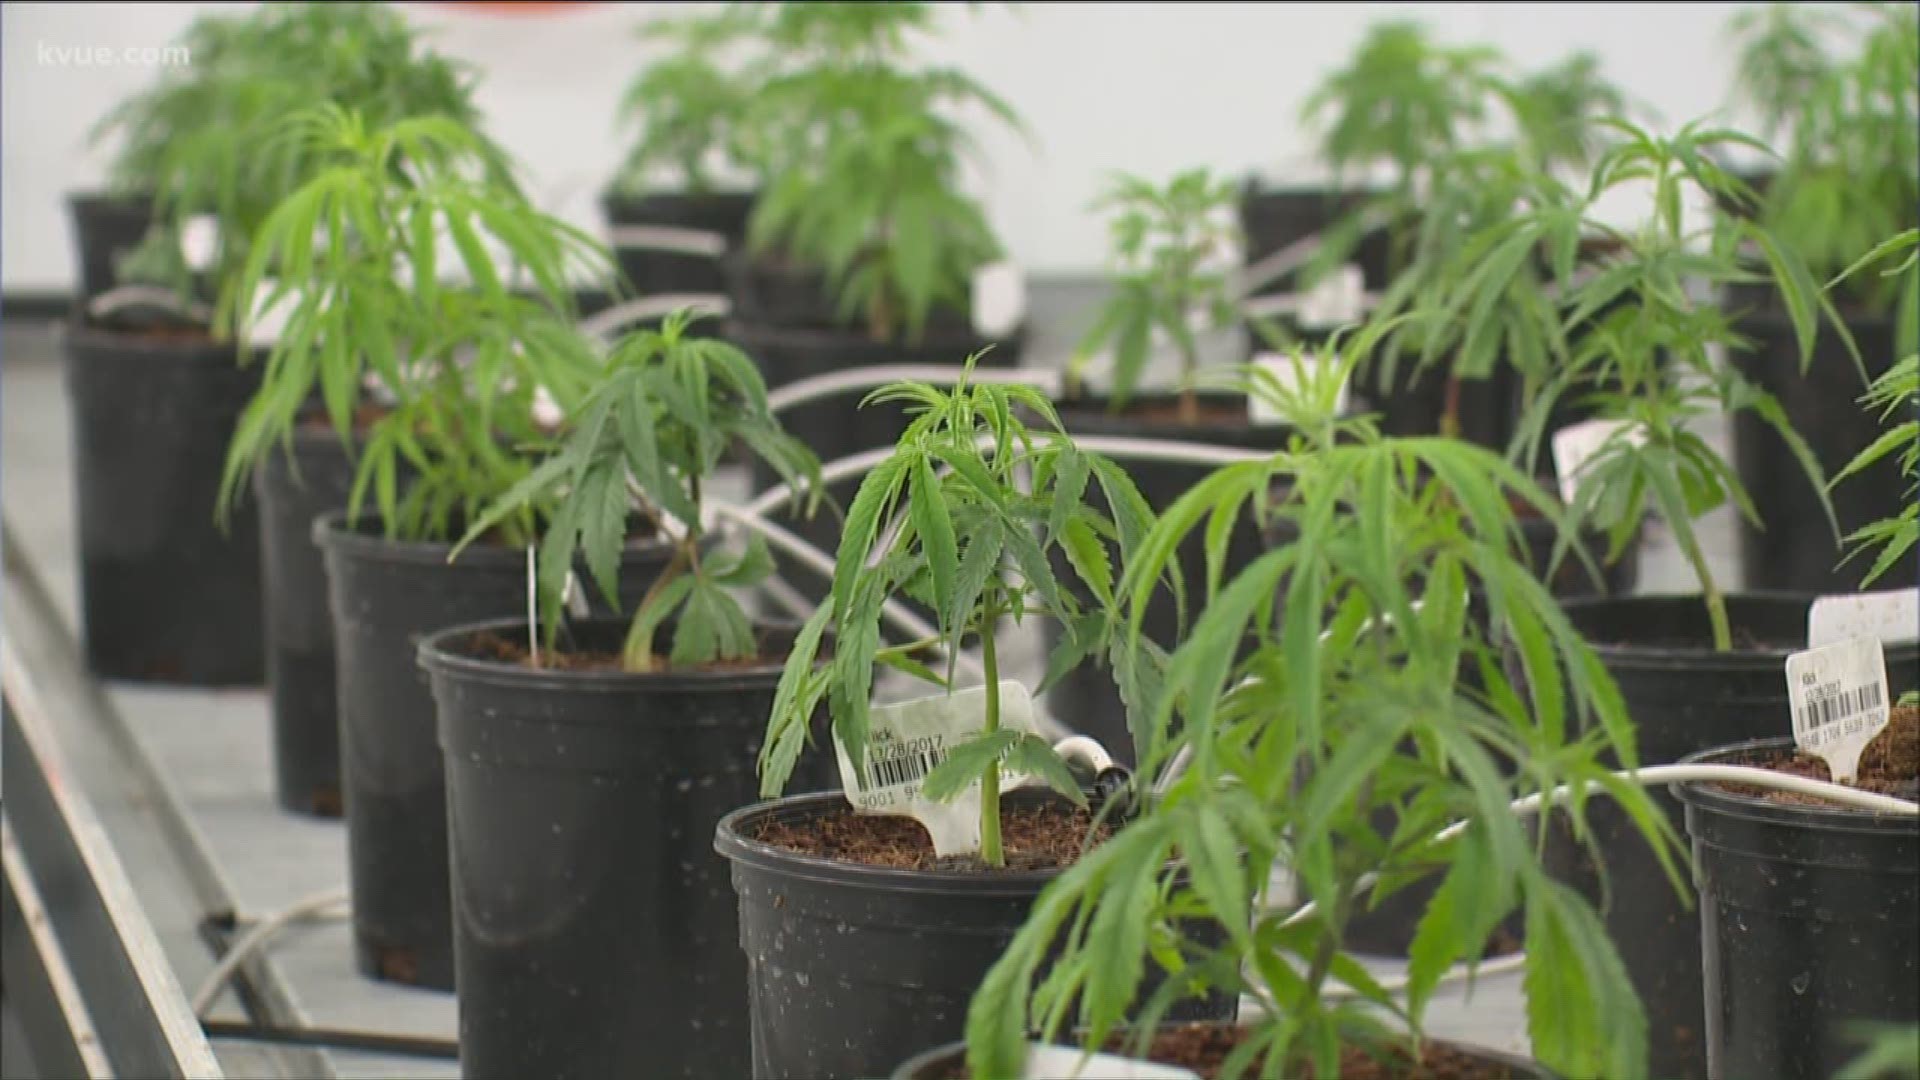 What would it take to loosen the laws on marijuana in Texas? We talked with the experts.